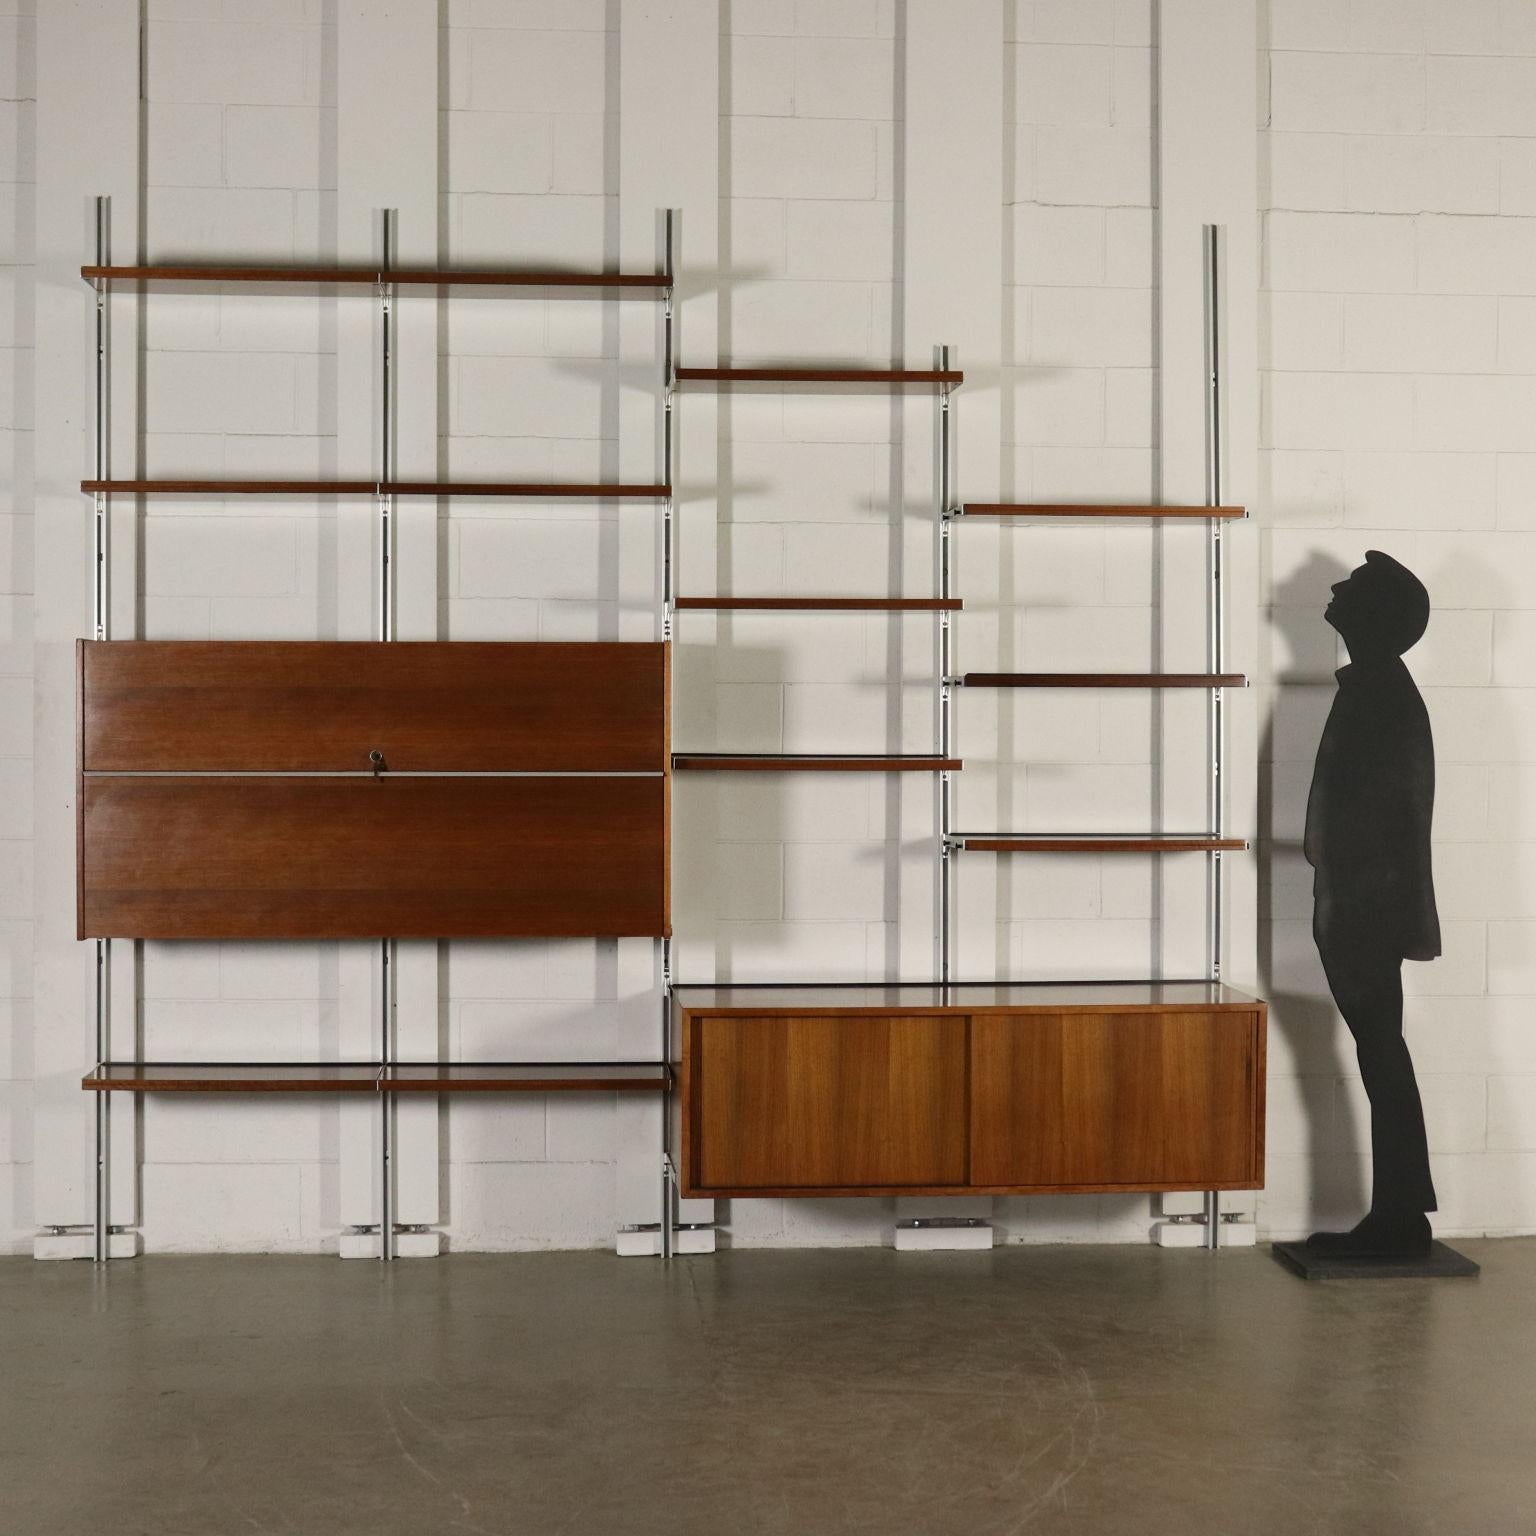 Modular wall bookcase designed by Osvaldo Borsani (1911-1985) for Tecno. Adjustable aluminium rails and supports, walnut and wood veneered shelves and containers. Model: E22. Manufactured in Italy, 1960s.